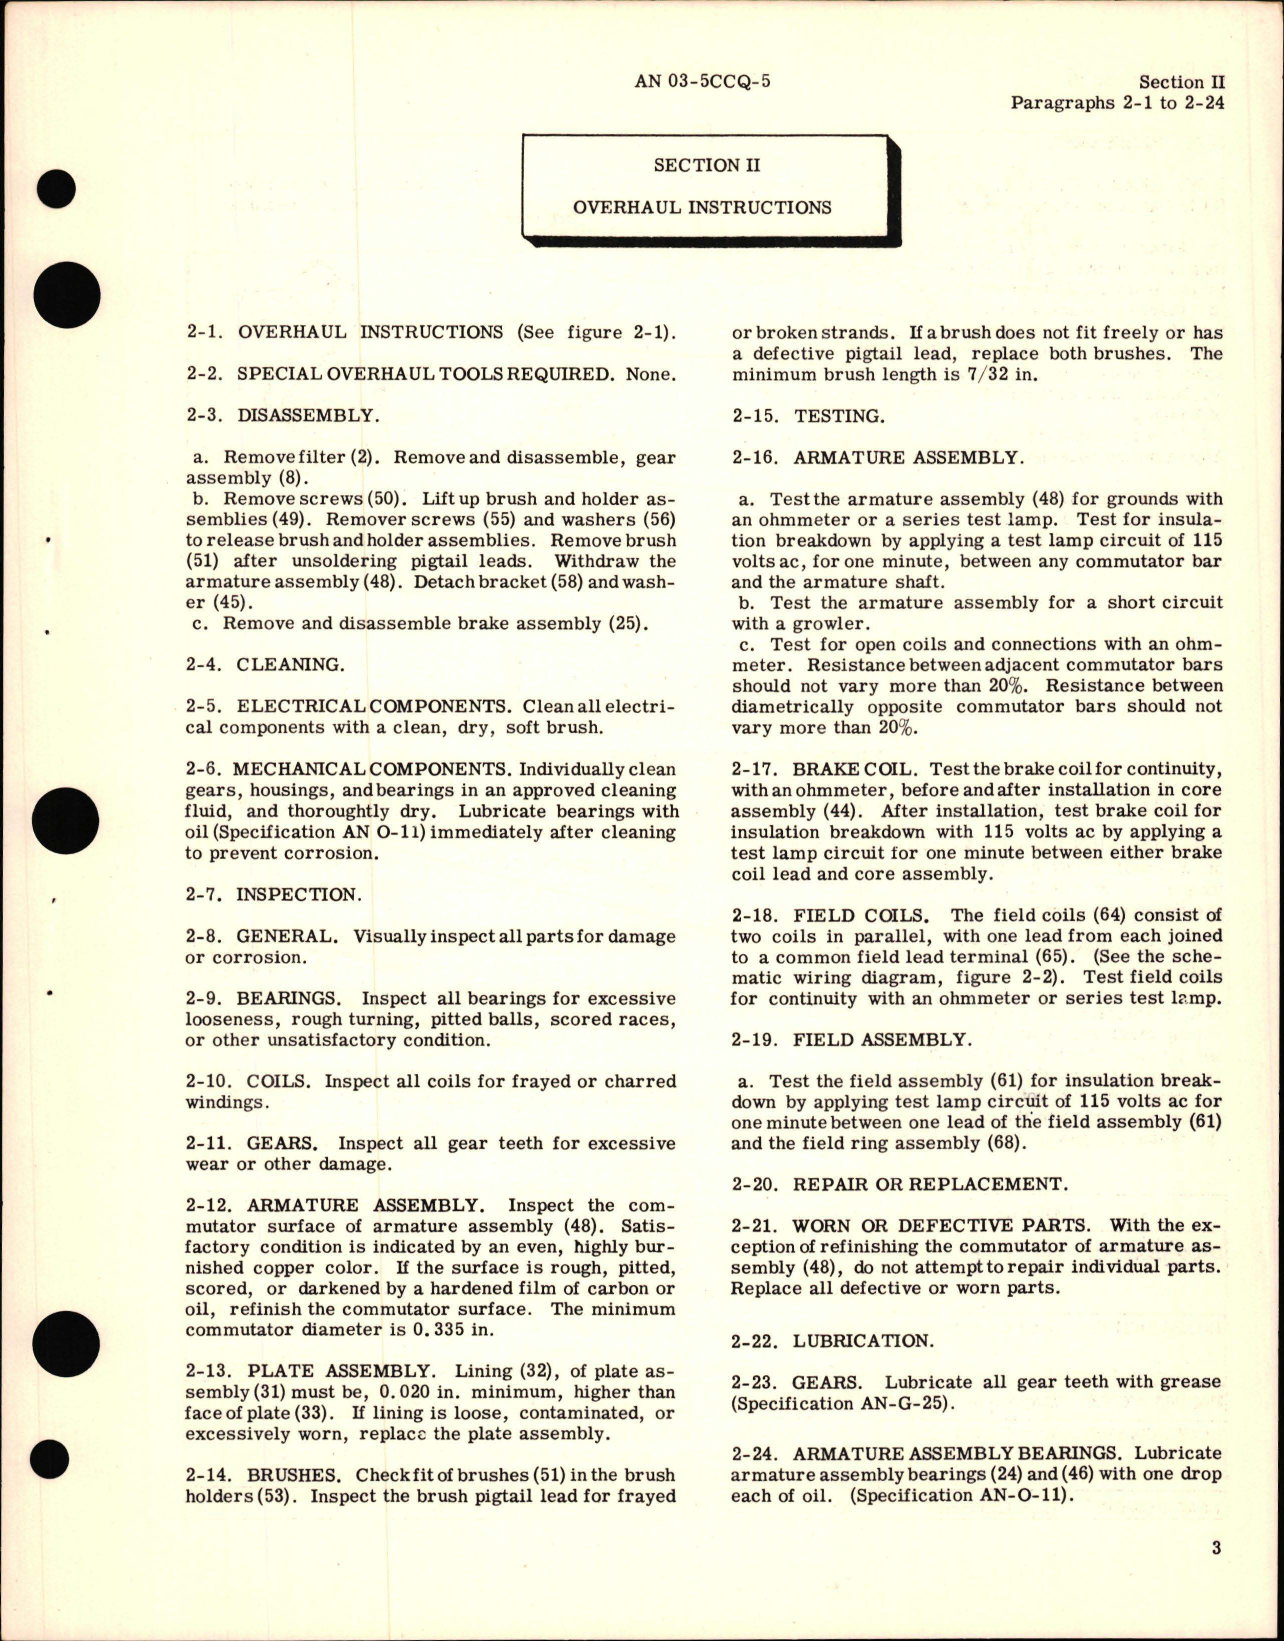 Sample page 5 from AirCorps Library document: Overhaul Instructions for Electric Motors - Models E-520 and E-520M4 